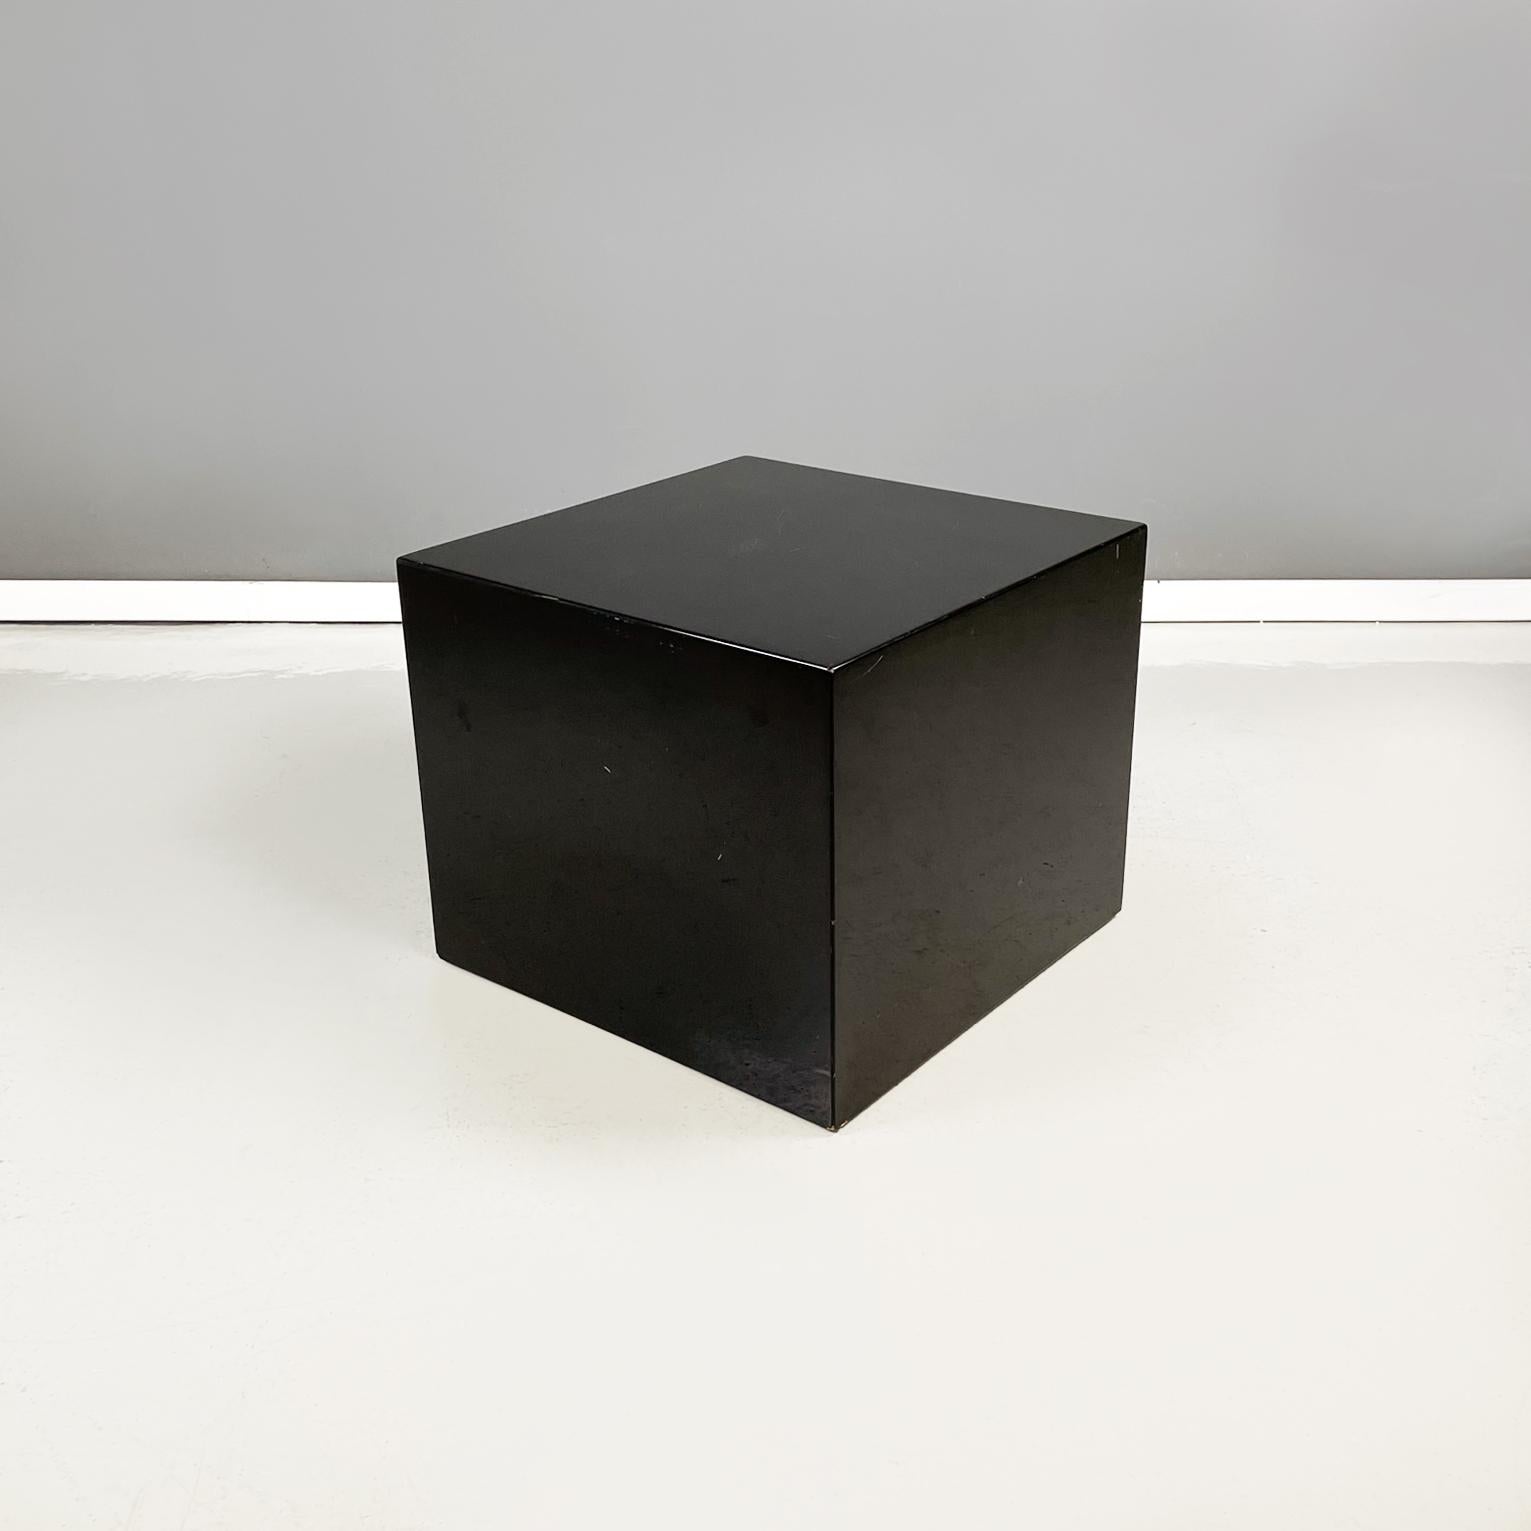 Italian modern Stand or Coffee tables in black lacquered wood, 1990s
Pair of coffee tables with square top, entirely in black lacquered wood. The edges of the table are rounded. At the base there are wheels. They can also be used as bedside tables,